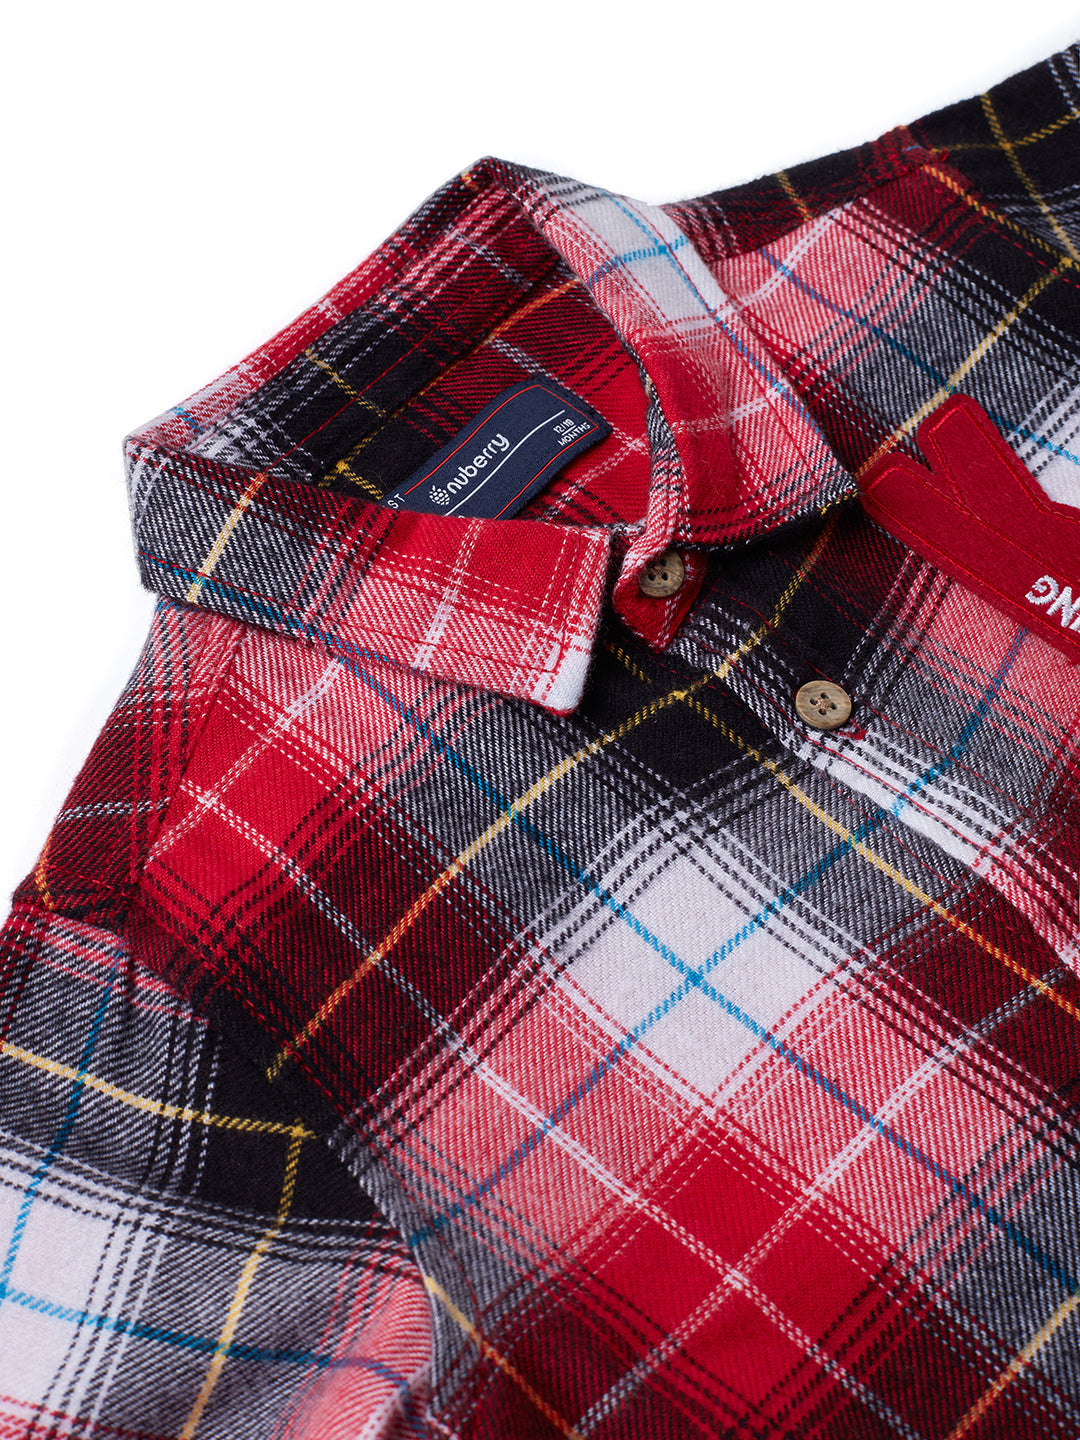 Nuberry Boys Full Sleeve Red and White Checked Shirt